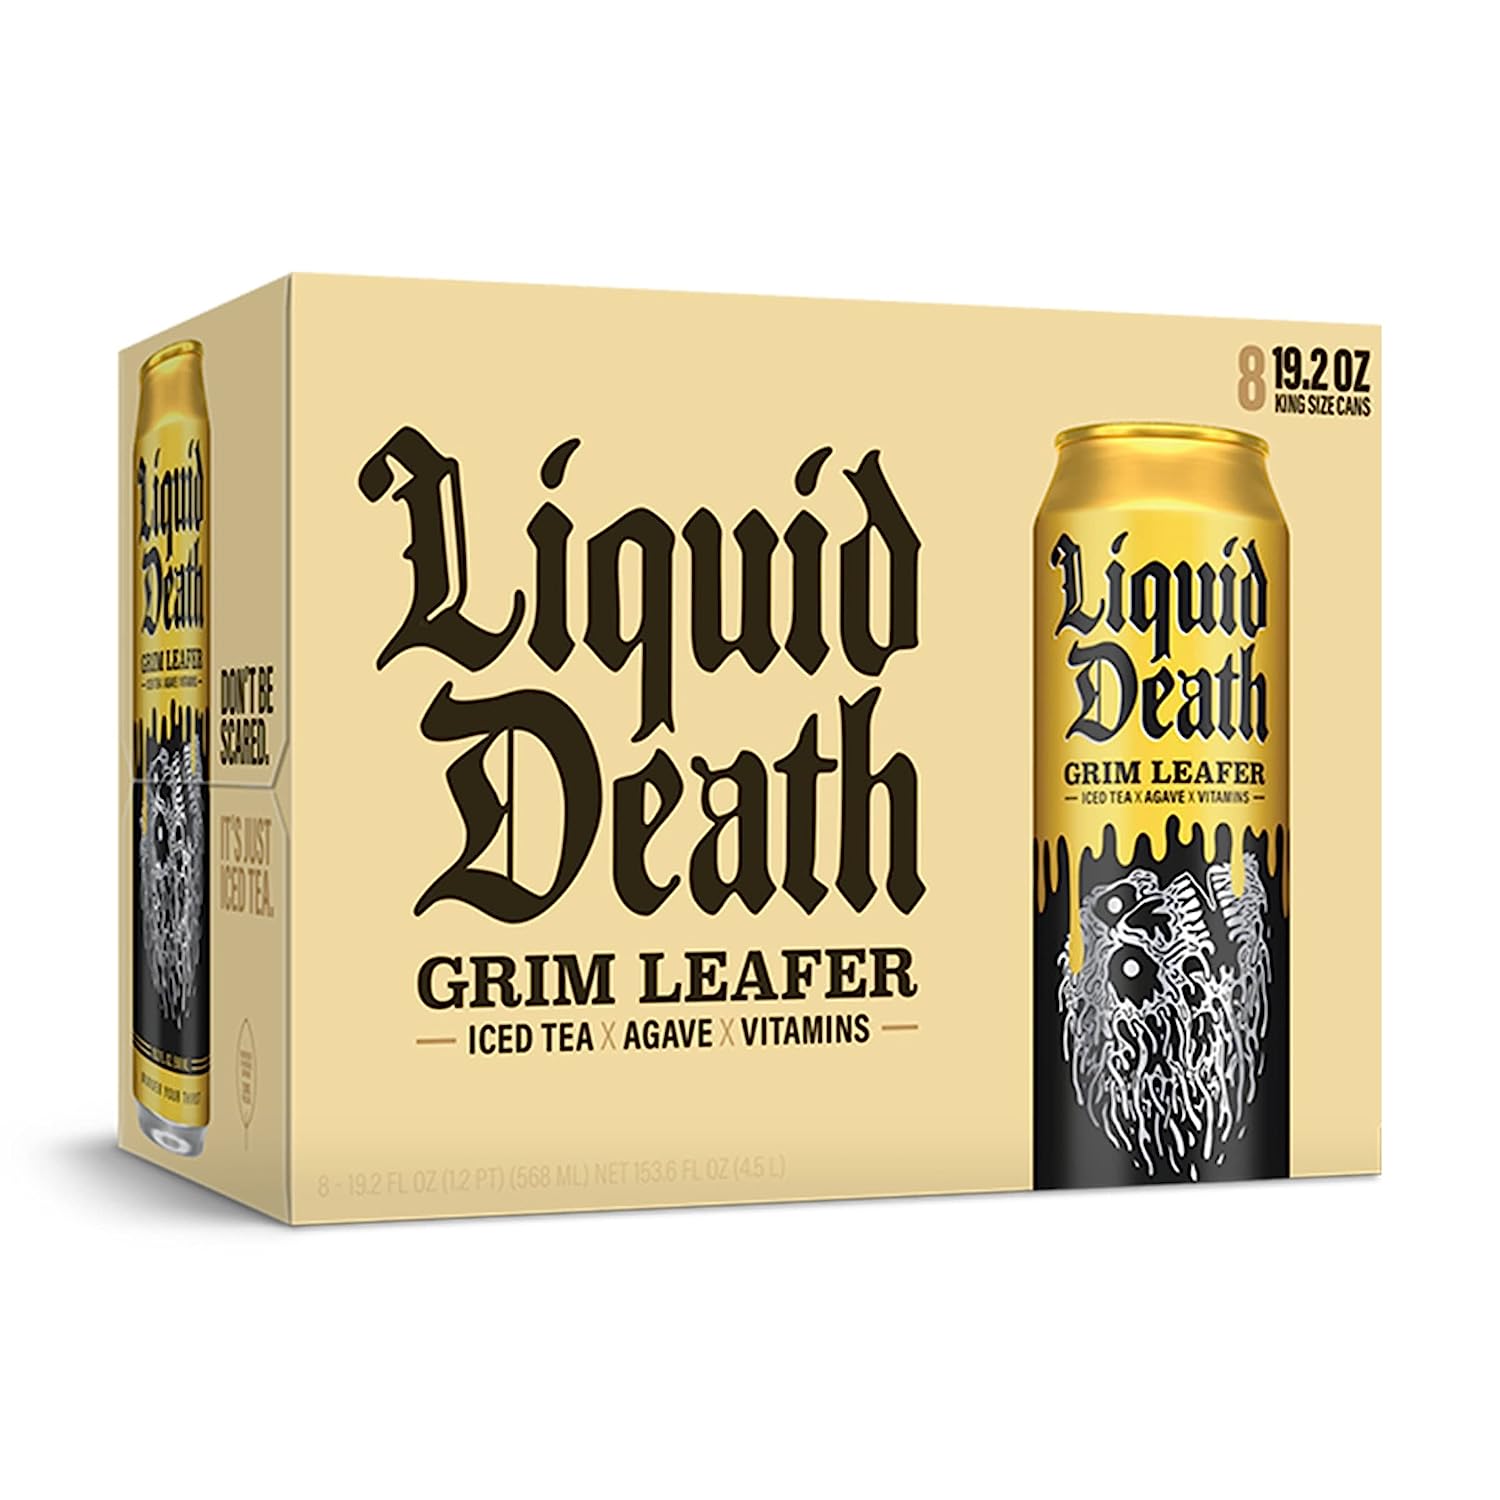 Wholesale prices with free shipping all over United States Liquid Death Iced Black Tea, Armless Palmer 19.2 oz King Size Cans (8-Pack) - Steven Deals